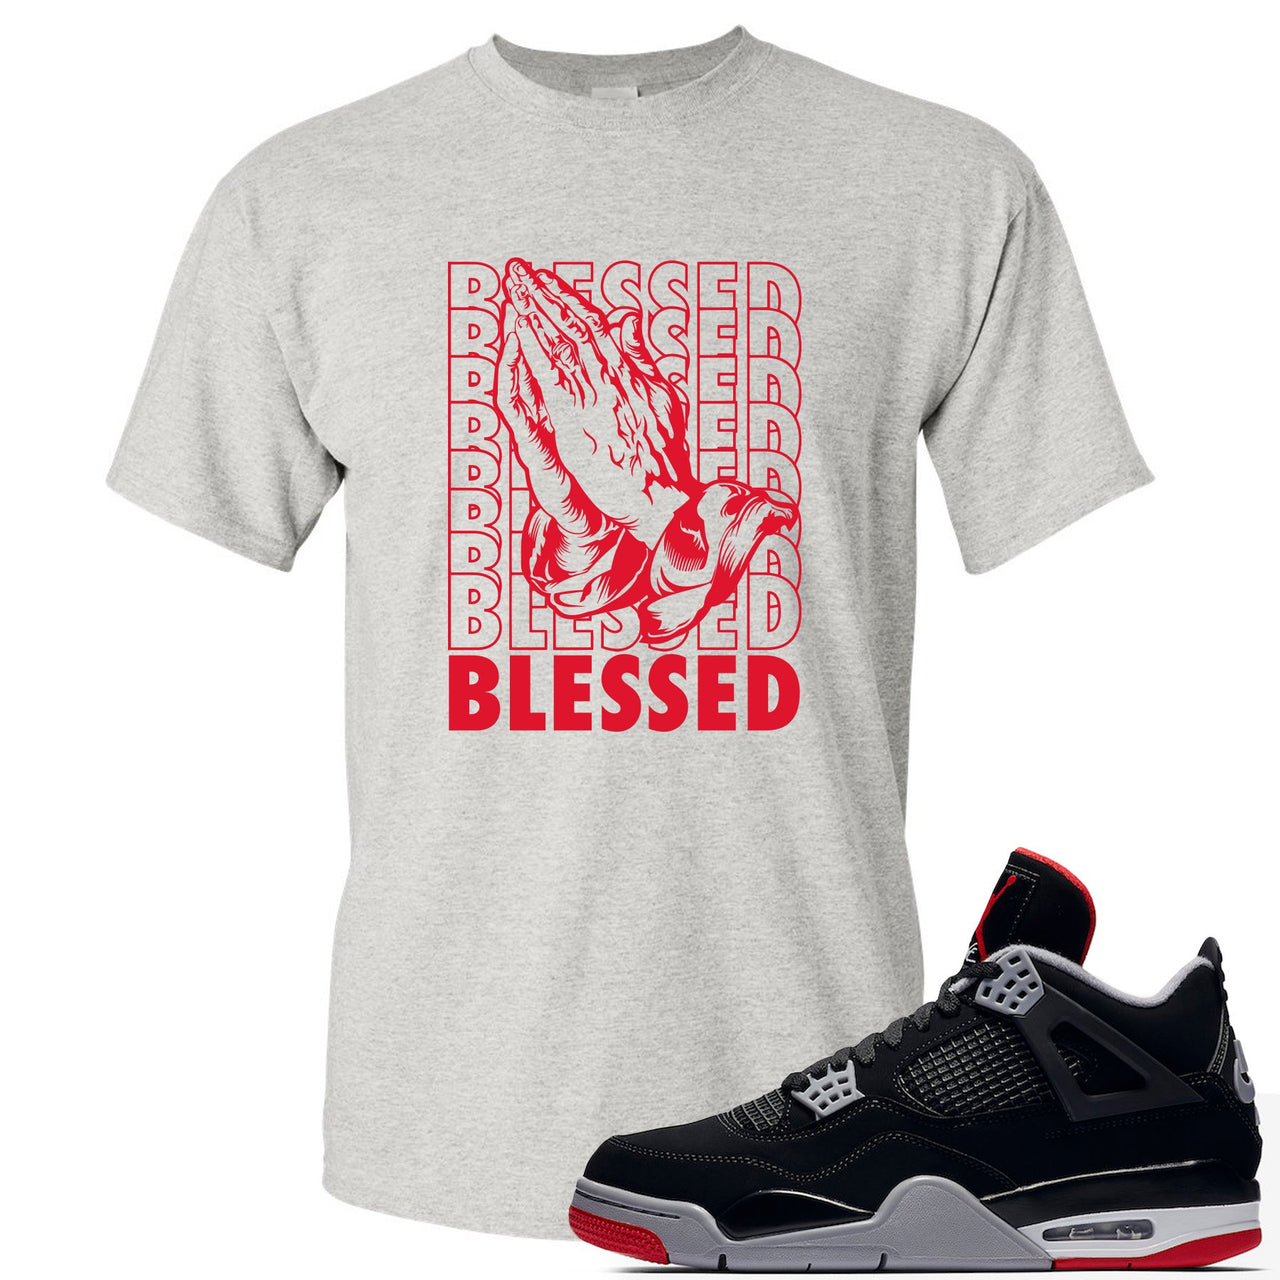 This white and red t-shirt will match great with your Air Jordan 4 Bred shoes